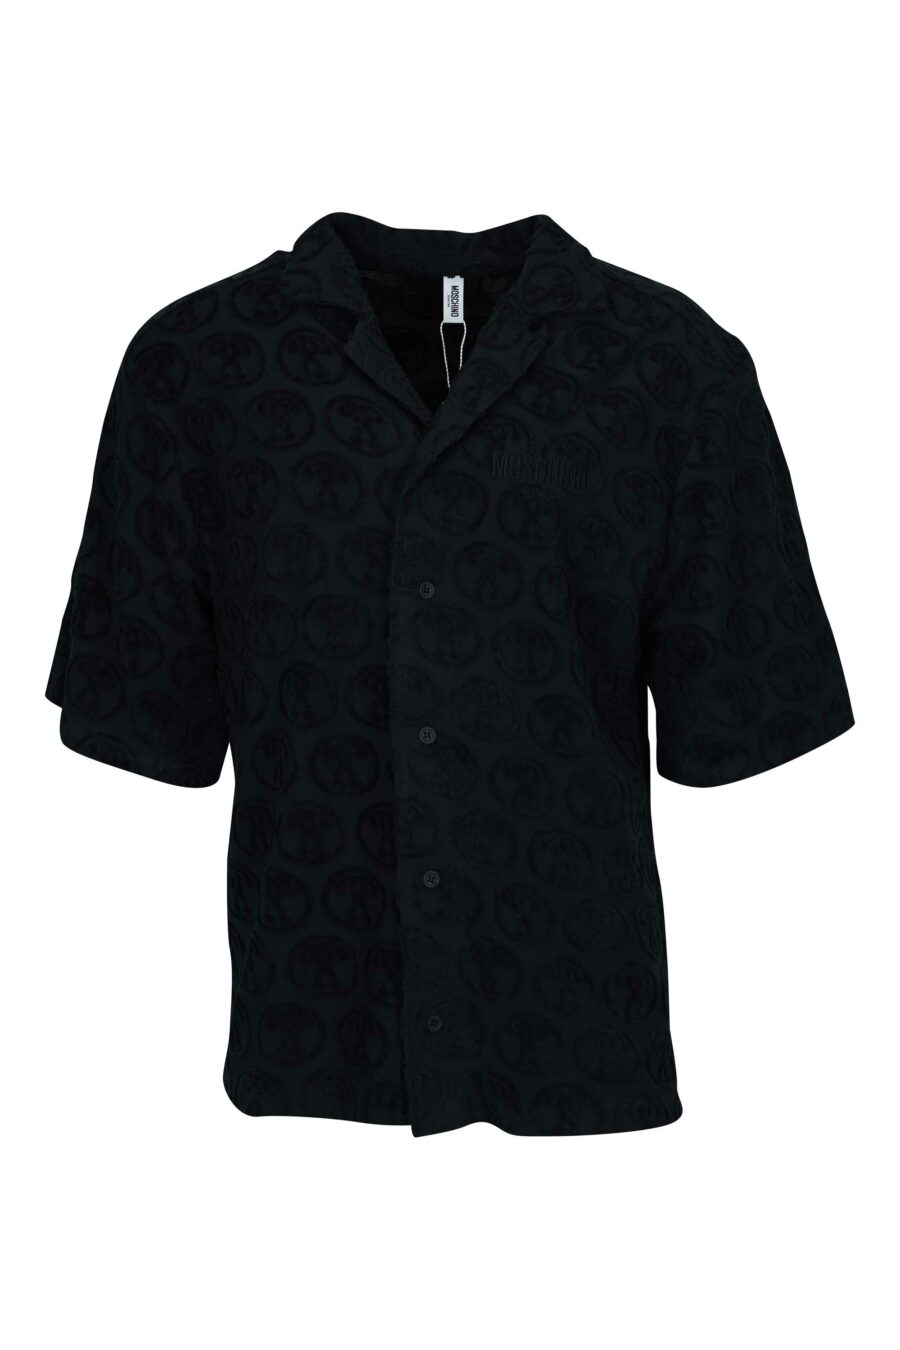 Black short sleeve shirt with "all over logo" double question - 667113670744